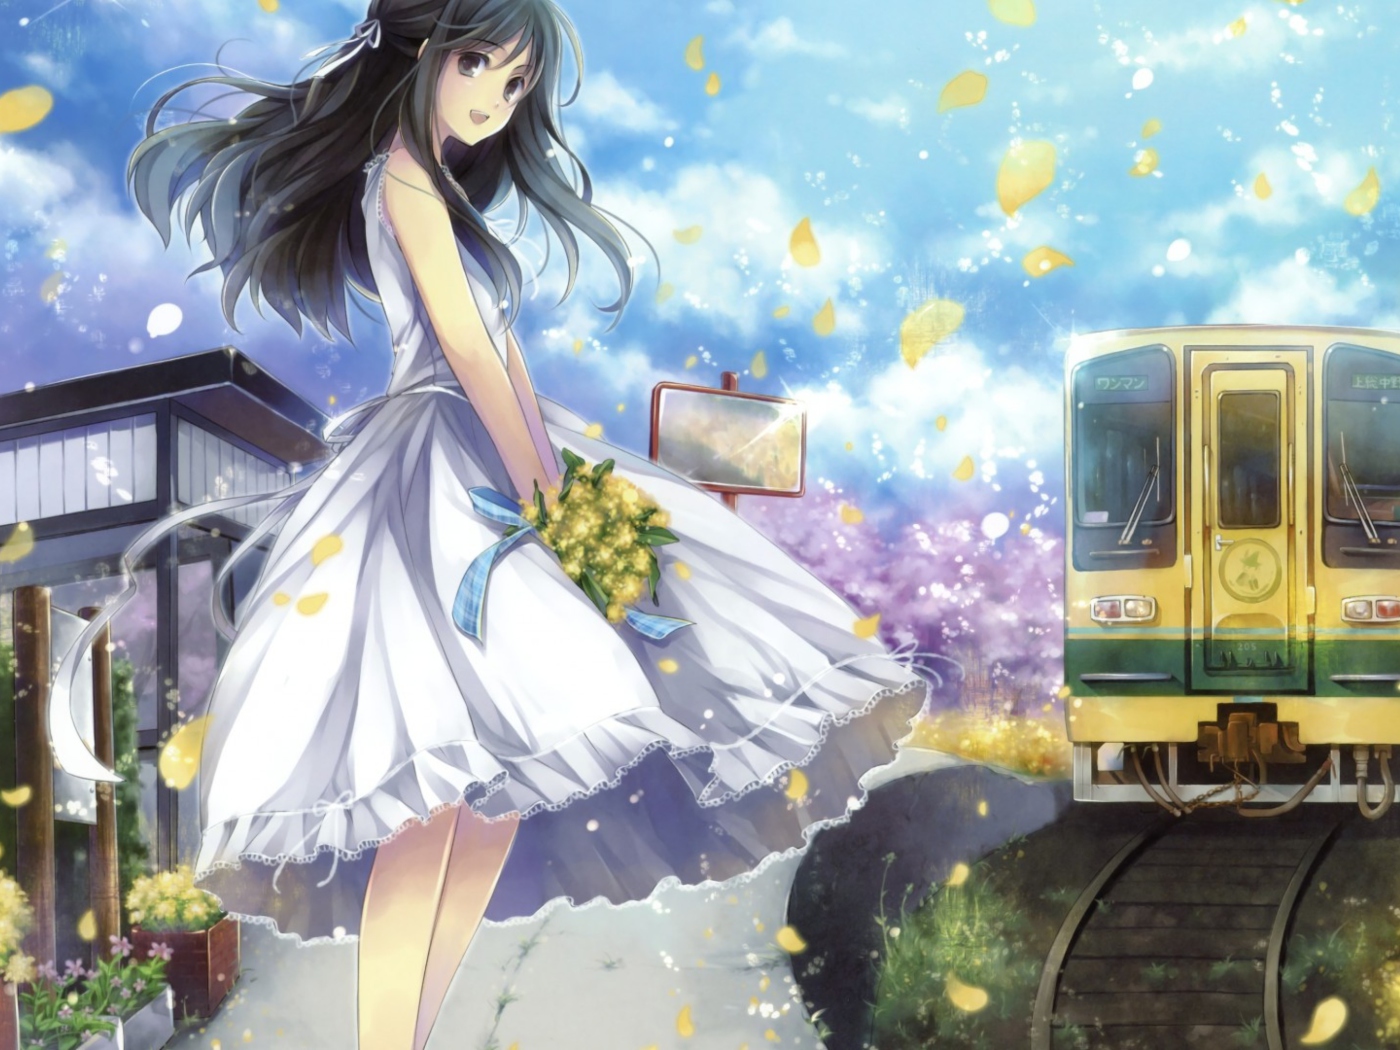 Girl In White Dress With Yellow Flowers Bouquet screenshot #1 1400x1050